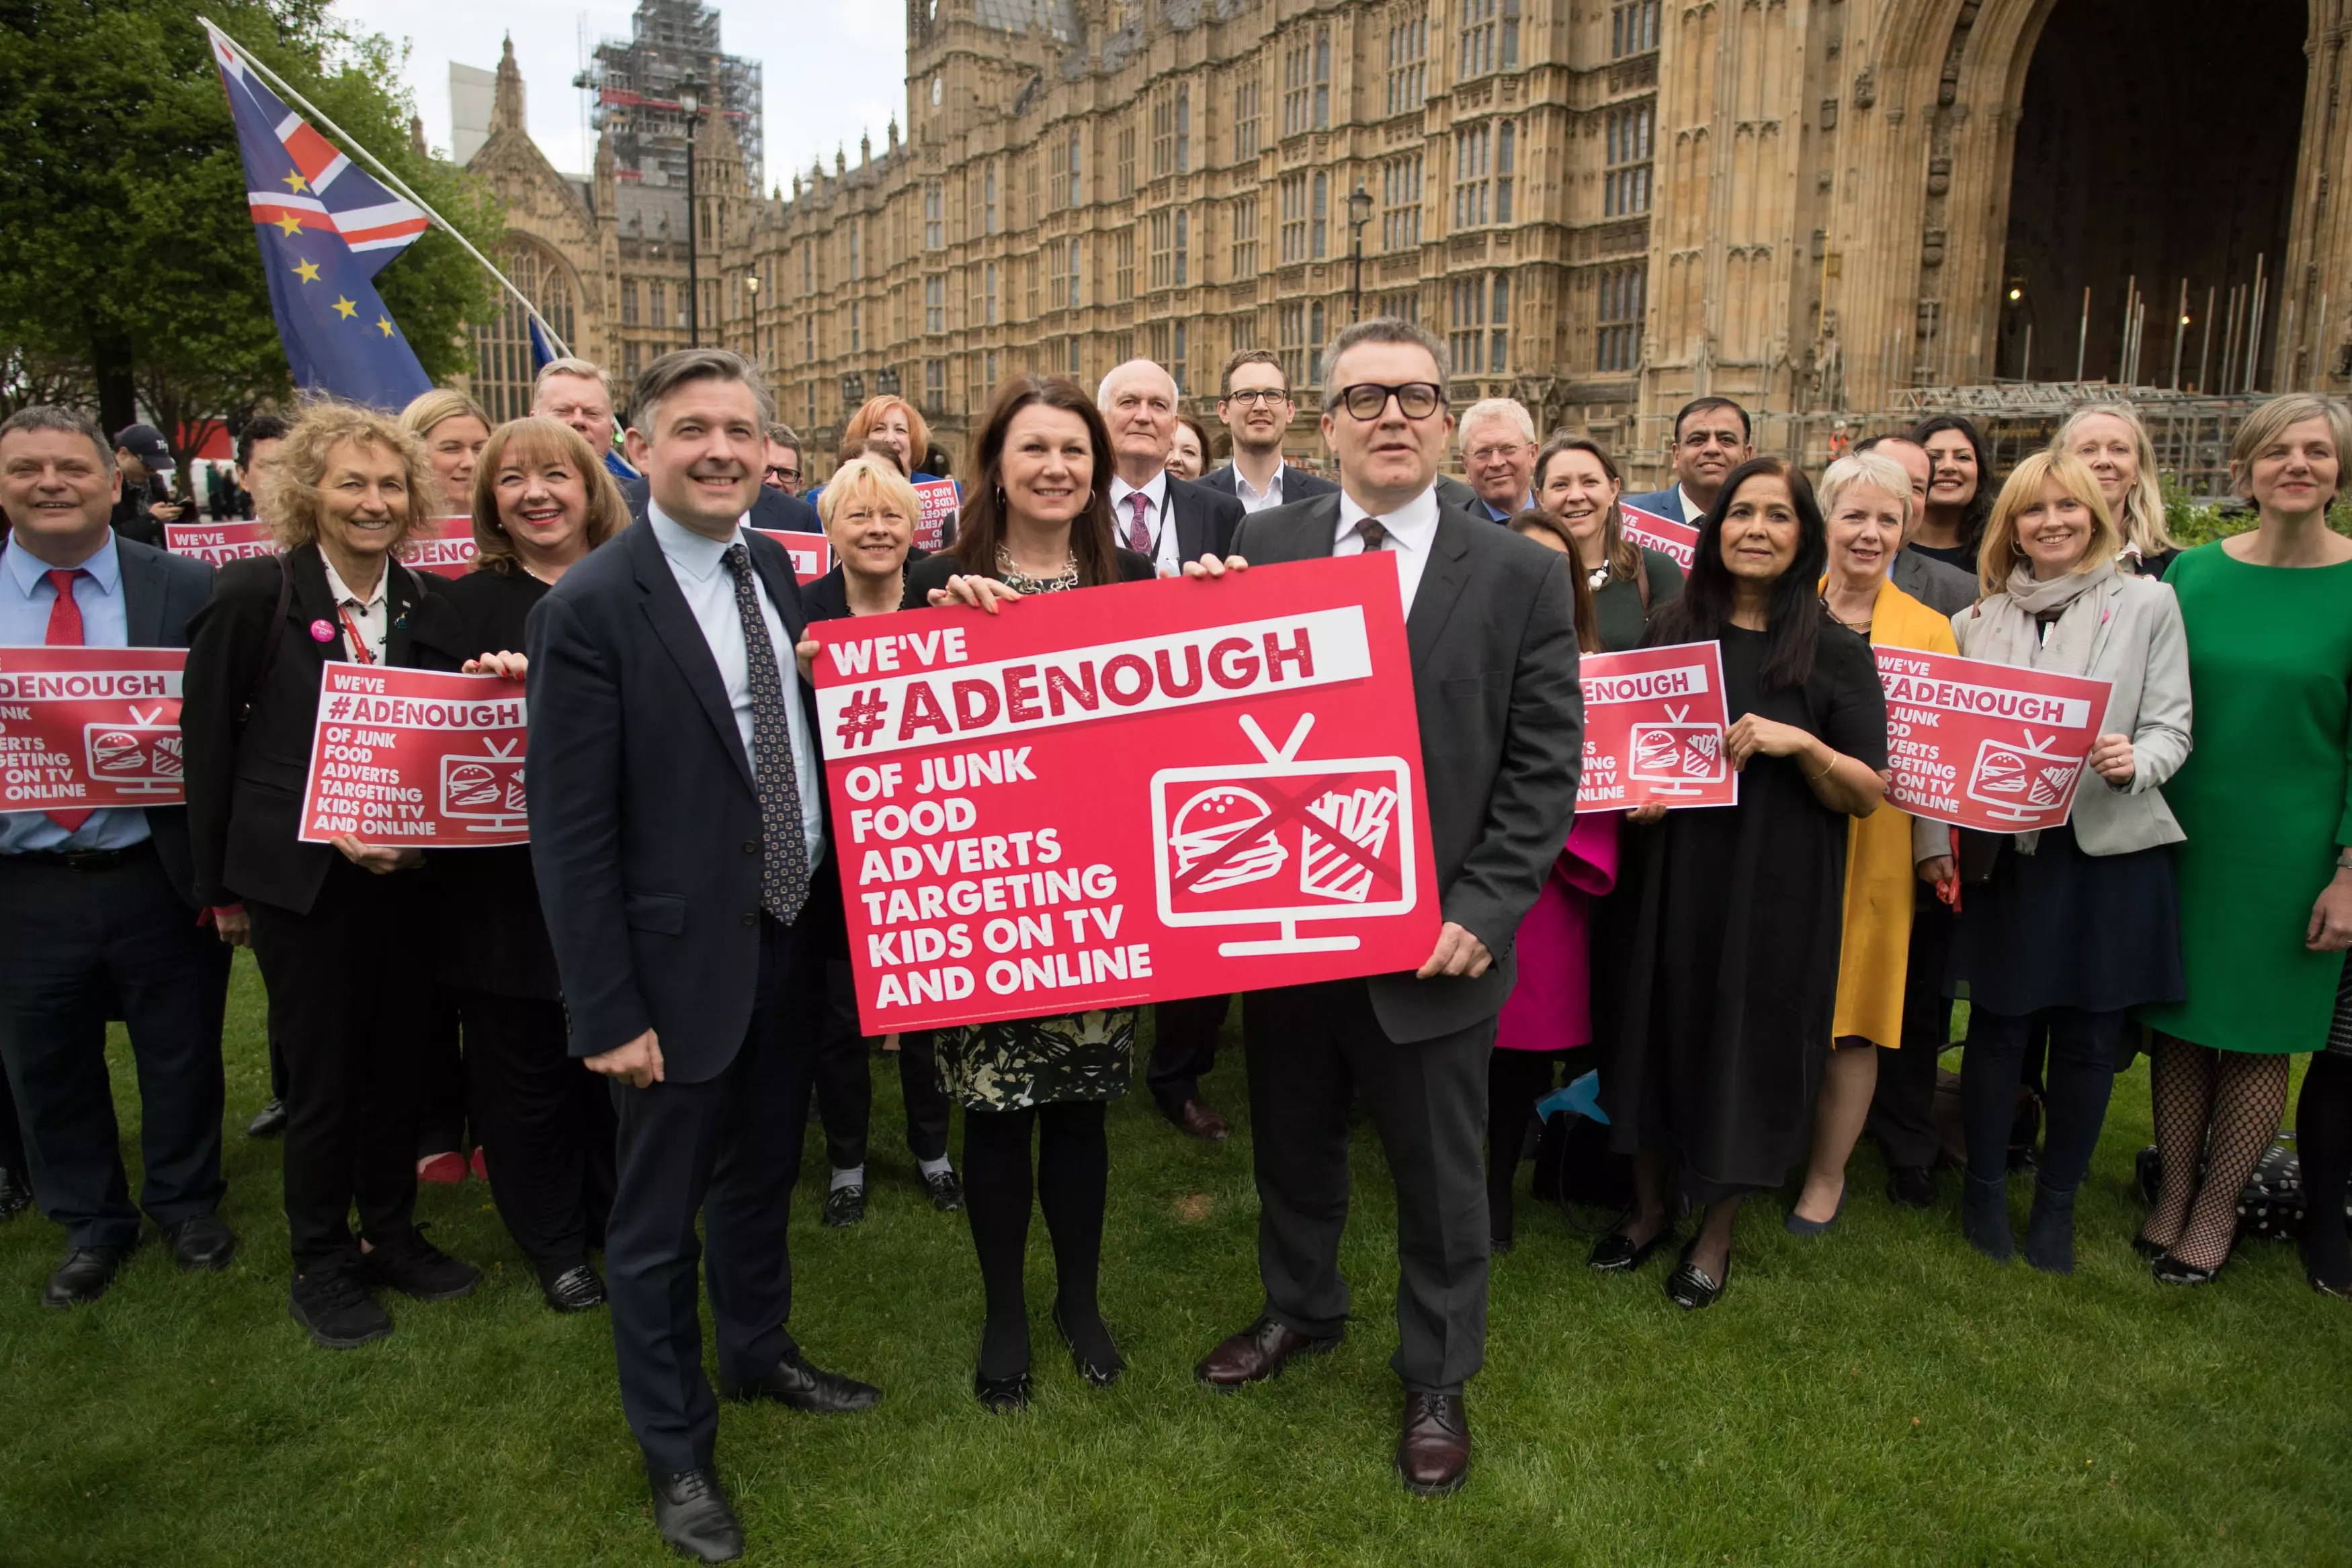 Politicians supporting Jamie's #AdEnough campaign.